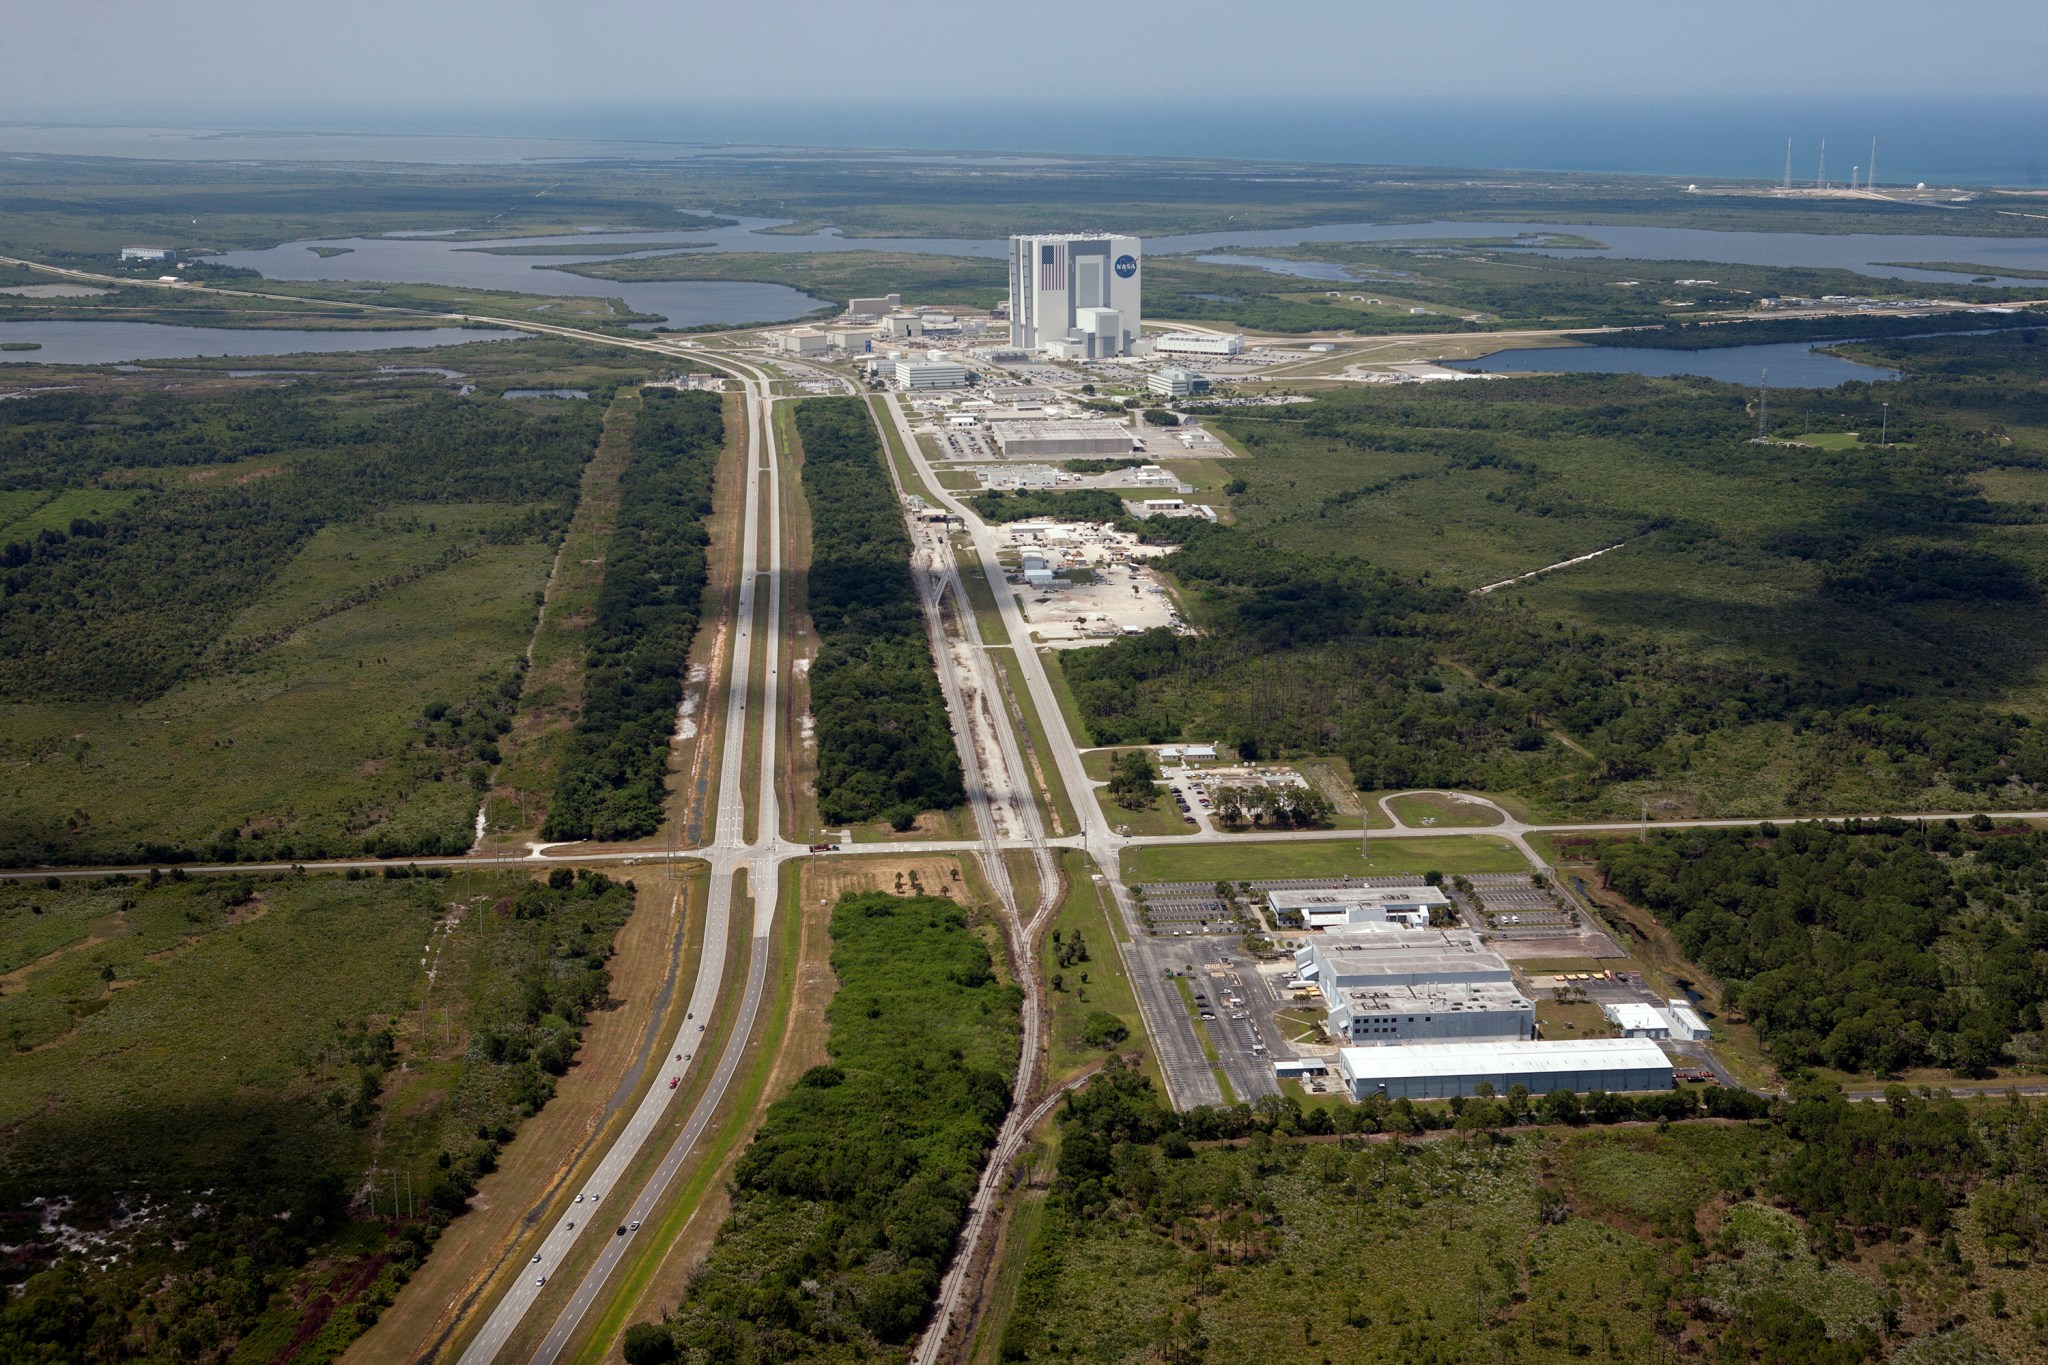 An aerial view of NASA's Kennedy Space Center includes the Vehicle Assembly Building and surrounding areas.